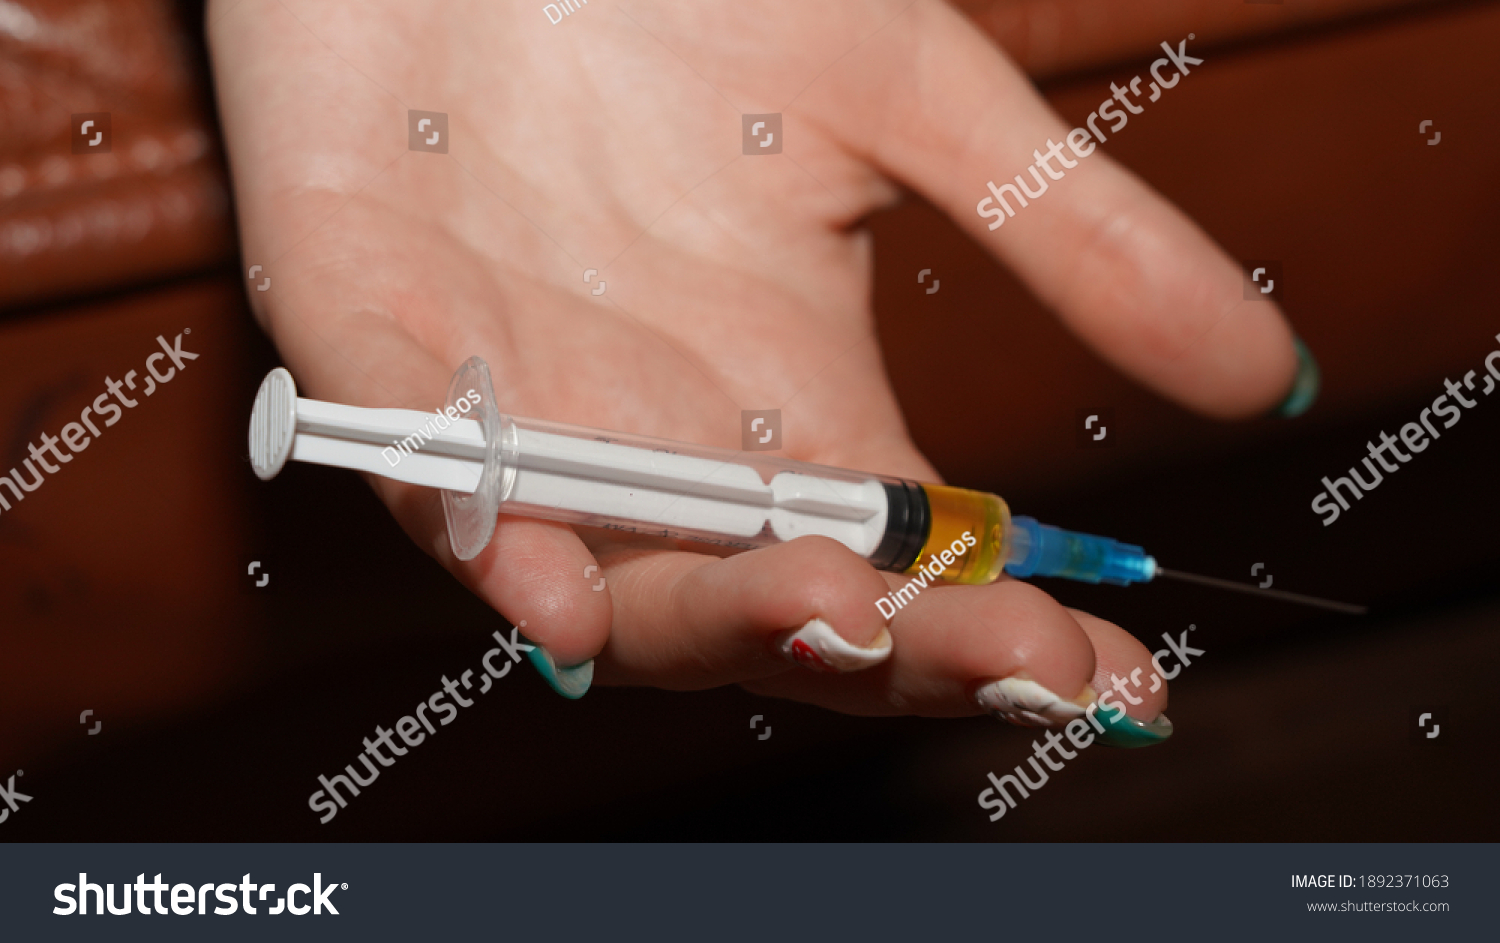 
Syringe in a woman's hand #1892371063